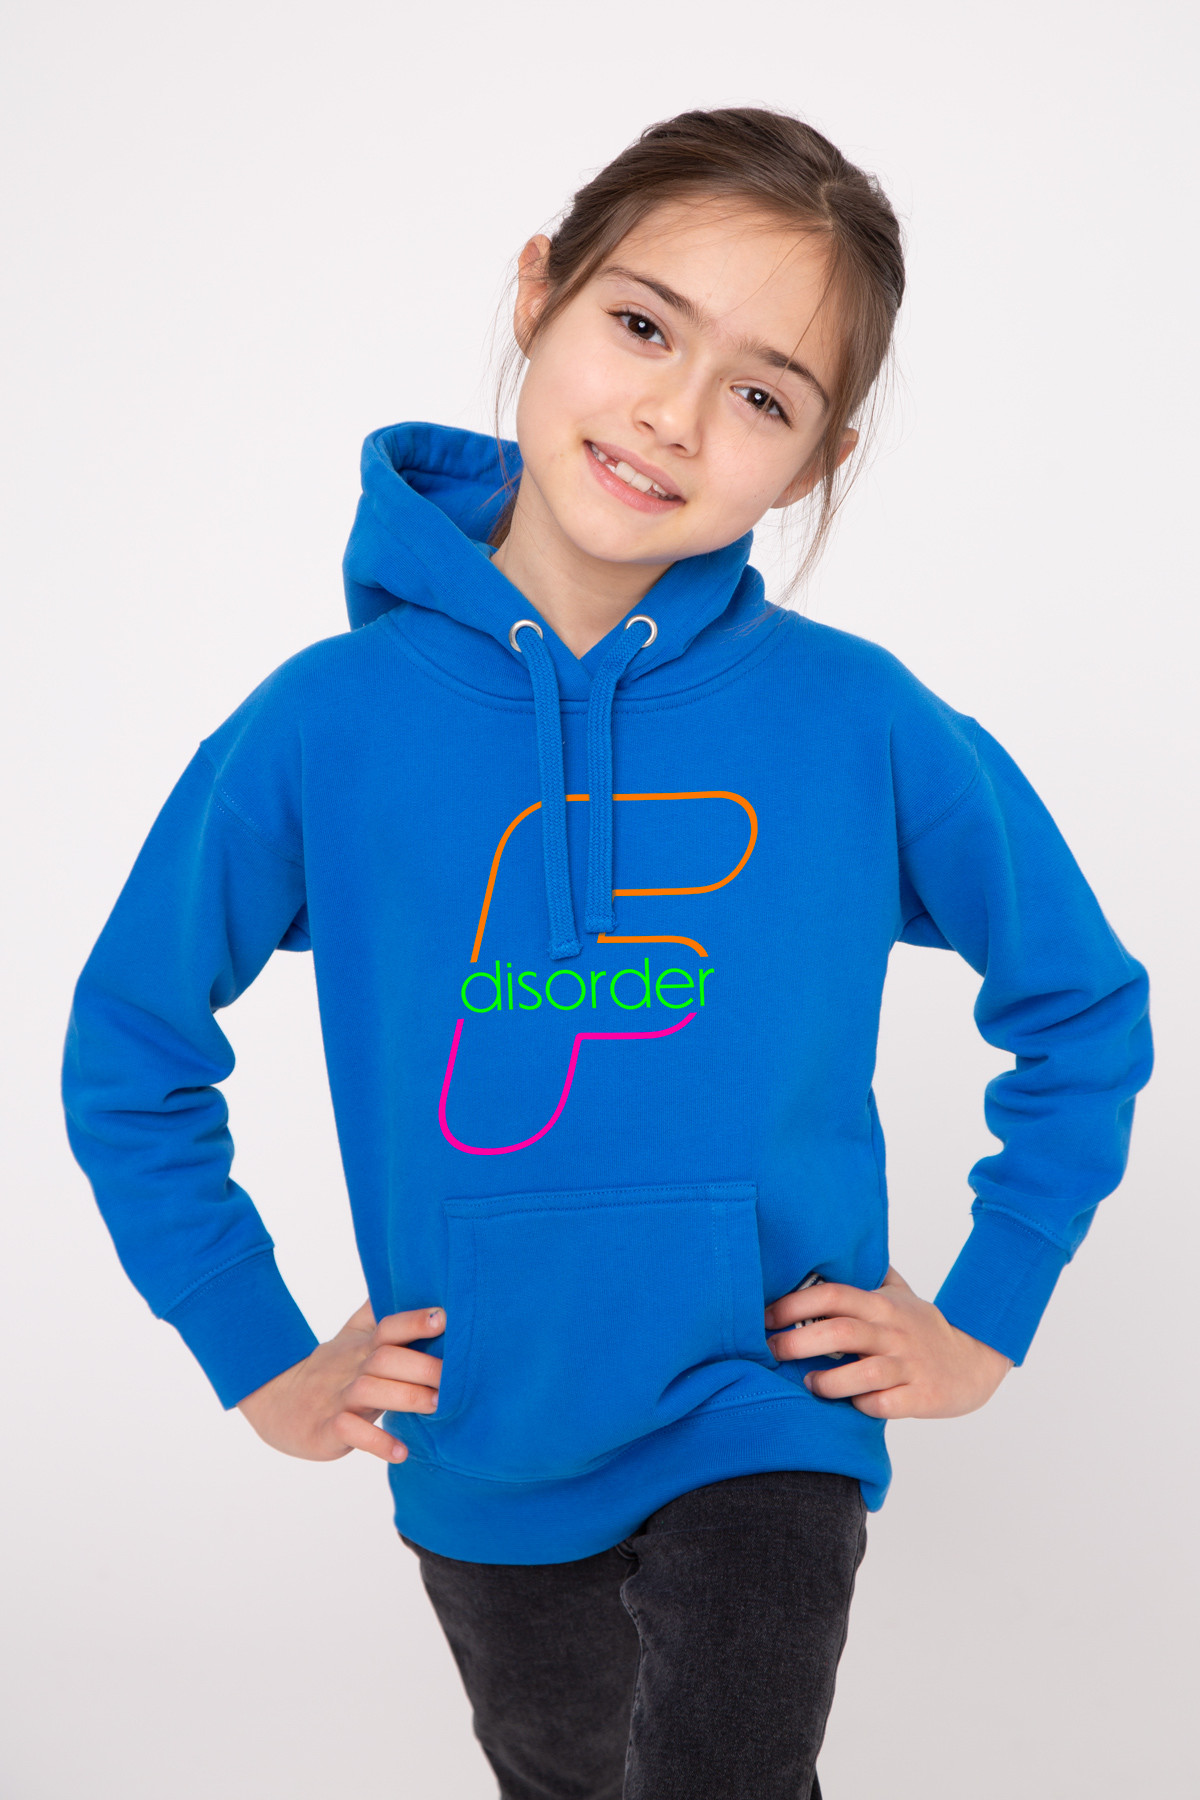 Photo de Soldes Kids Hoodie Kids F Disorder chez French Disorder